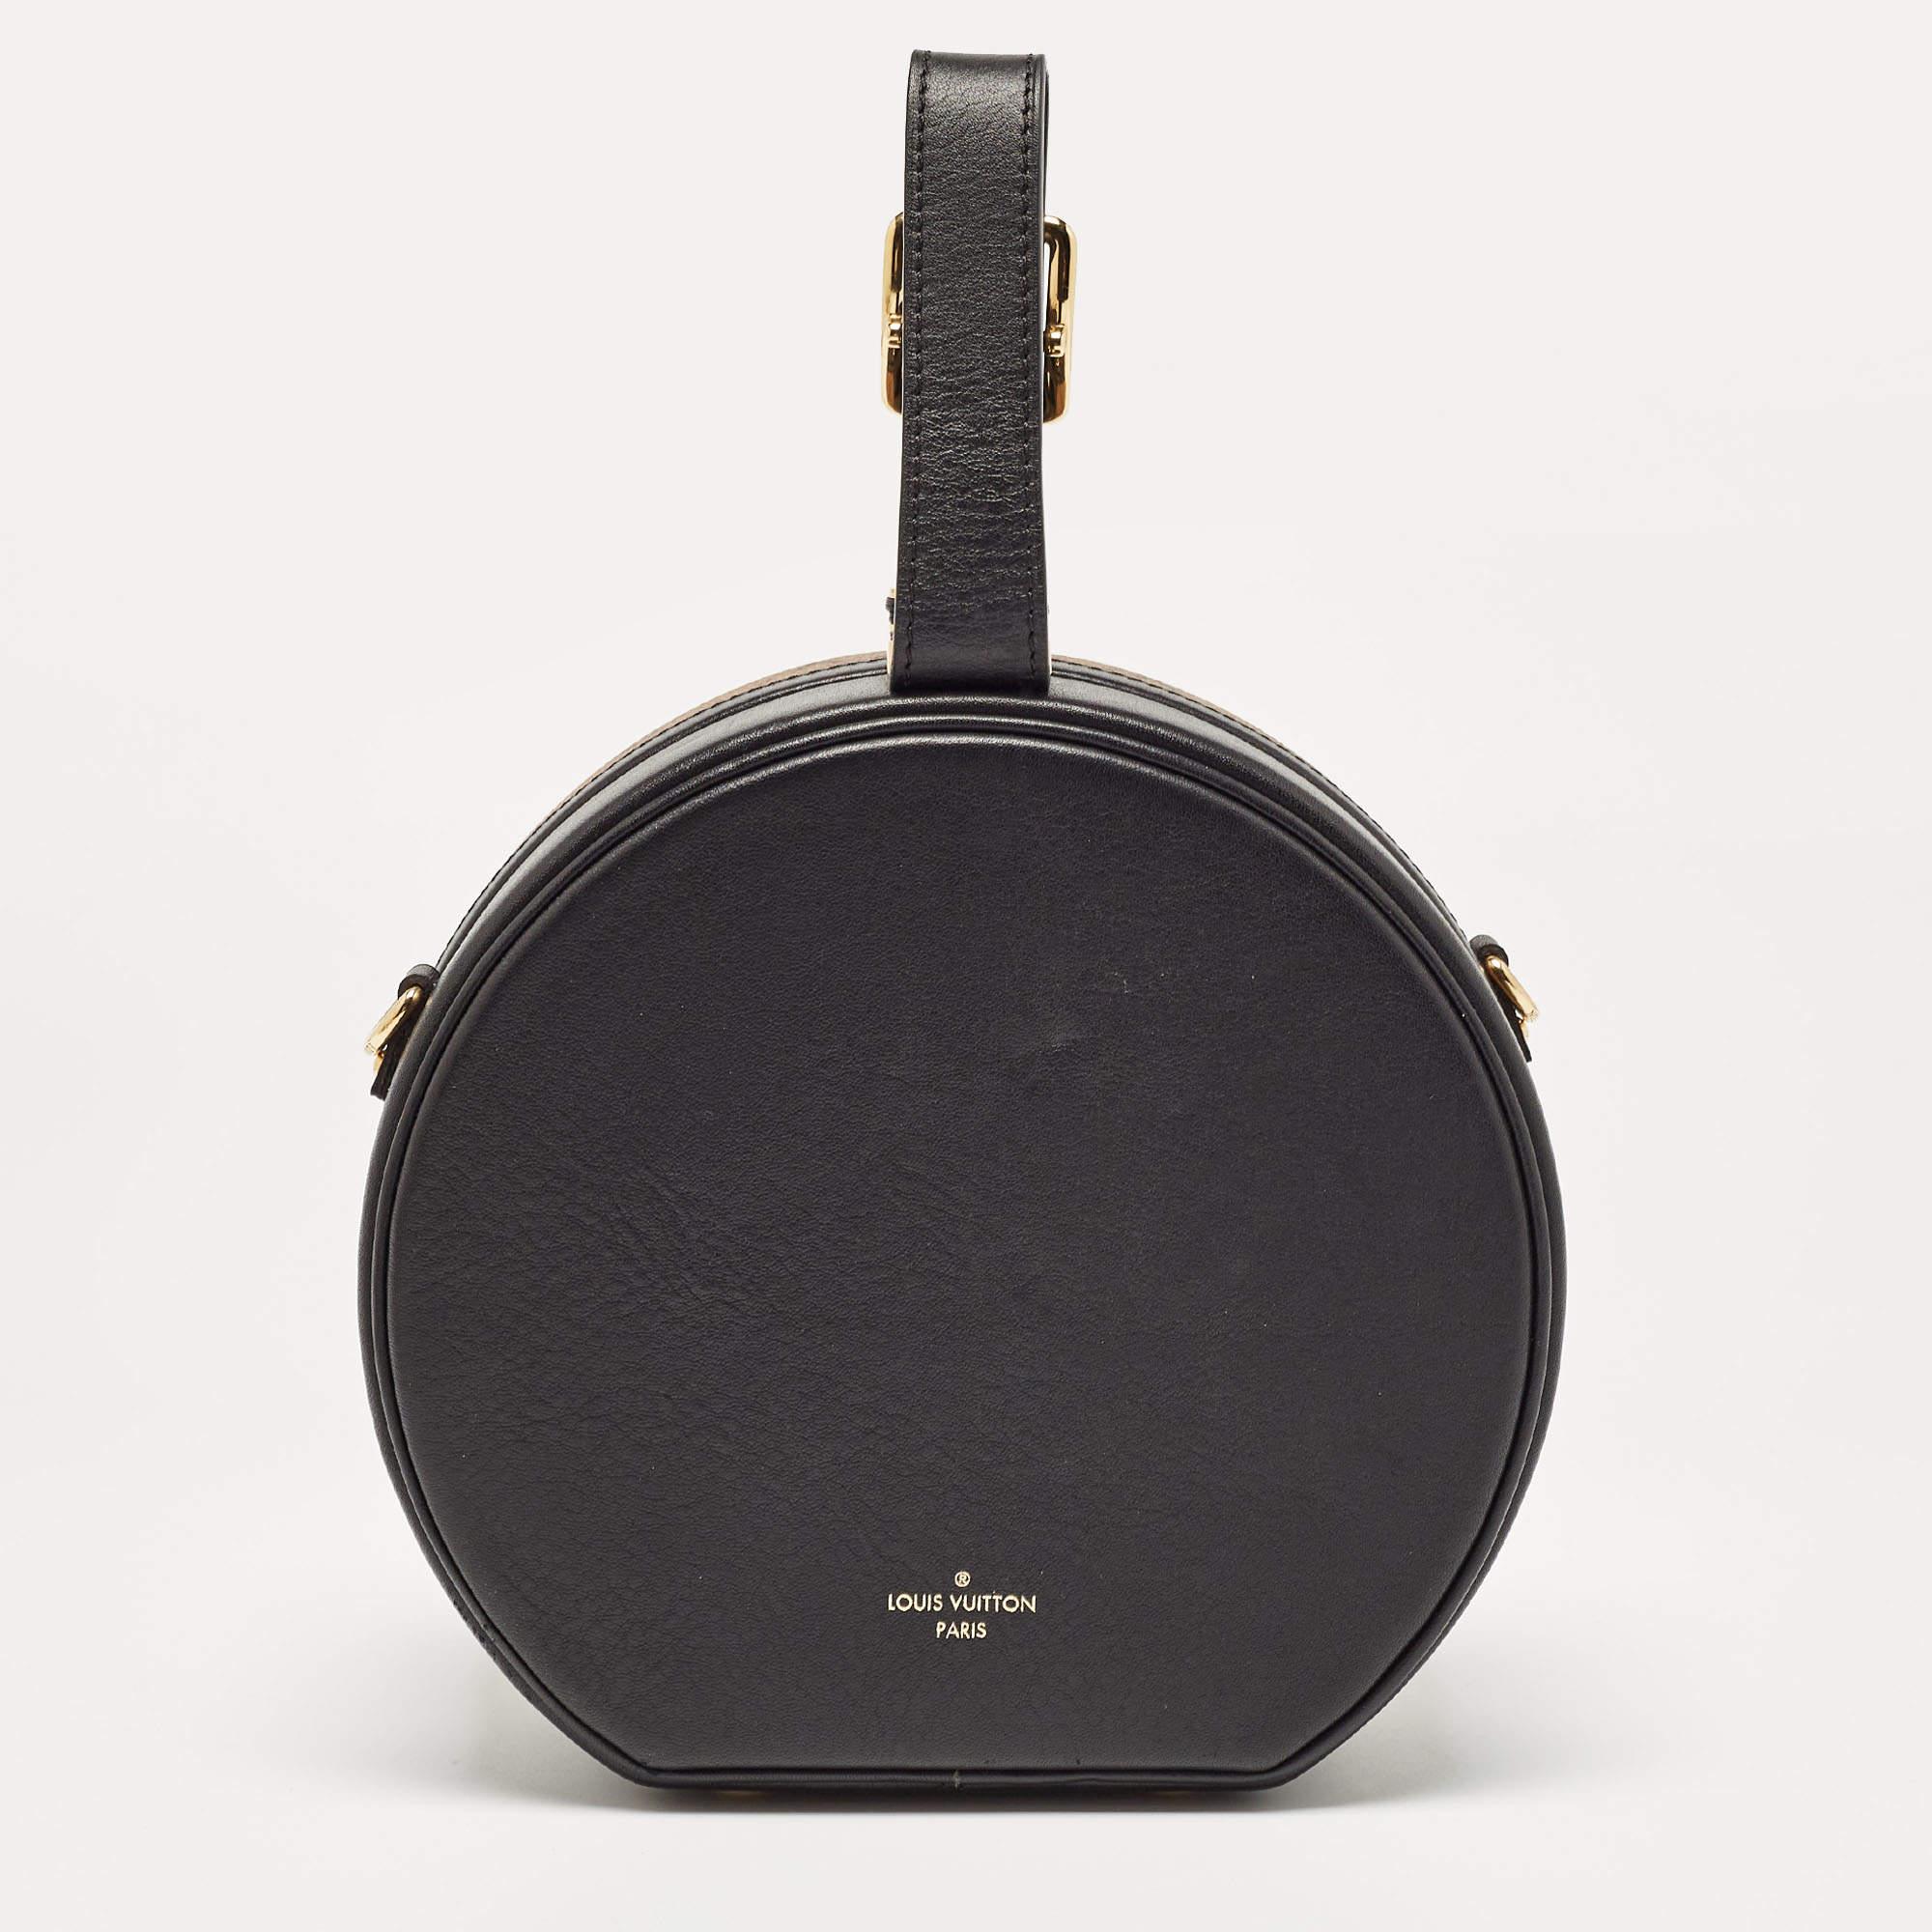 First seen on the Cruise 2018 runway show, Nicolas Ghesquière designed the Petite Boite Chapeau as a reimagined version of one of the brand's famous travel bags, the Hatbox. We have here the one in Monogram Reverse canvas, holding the signature